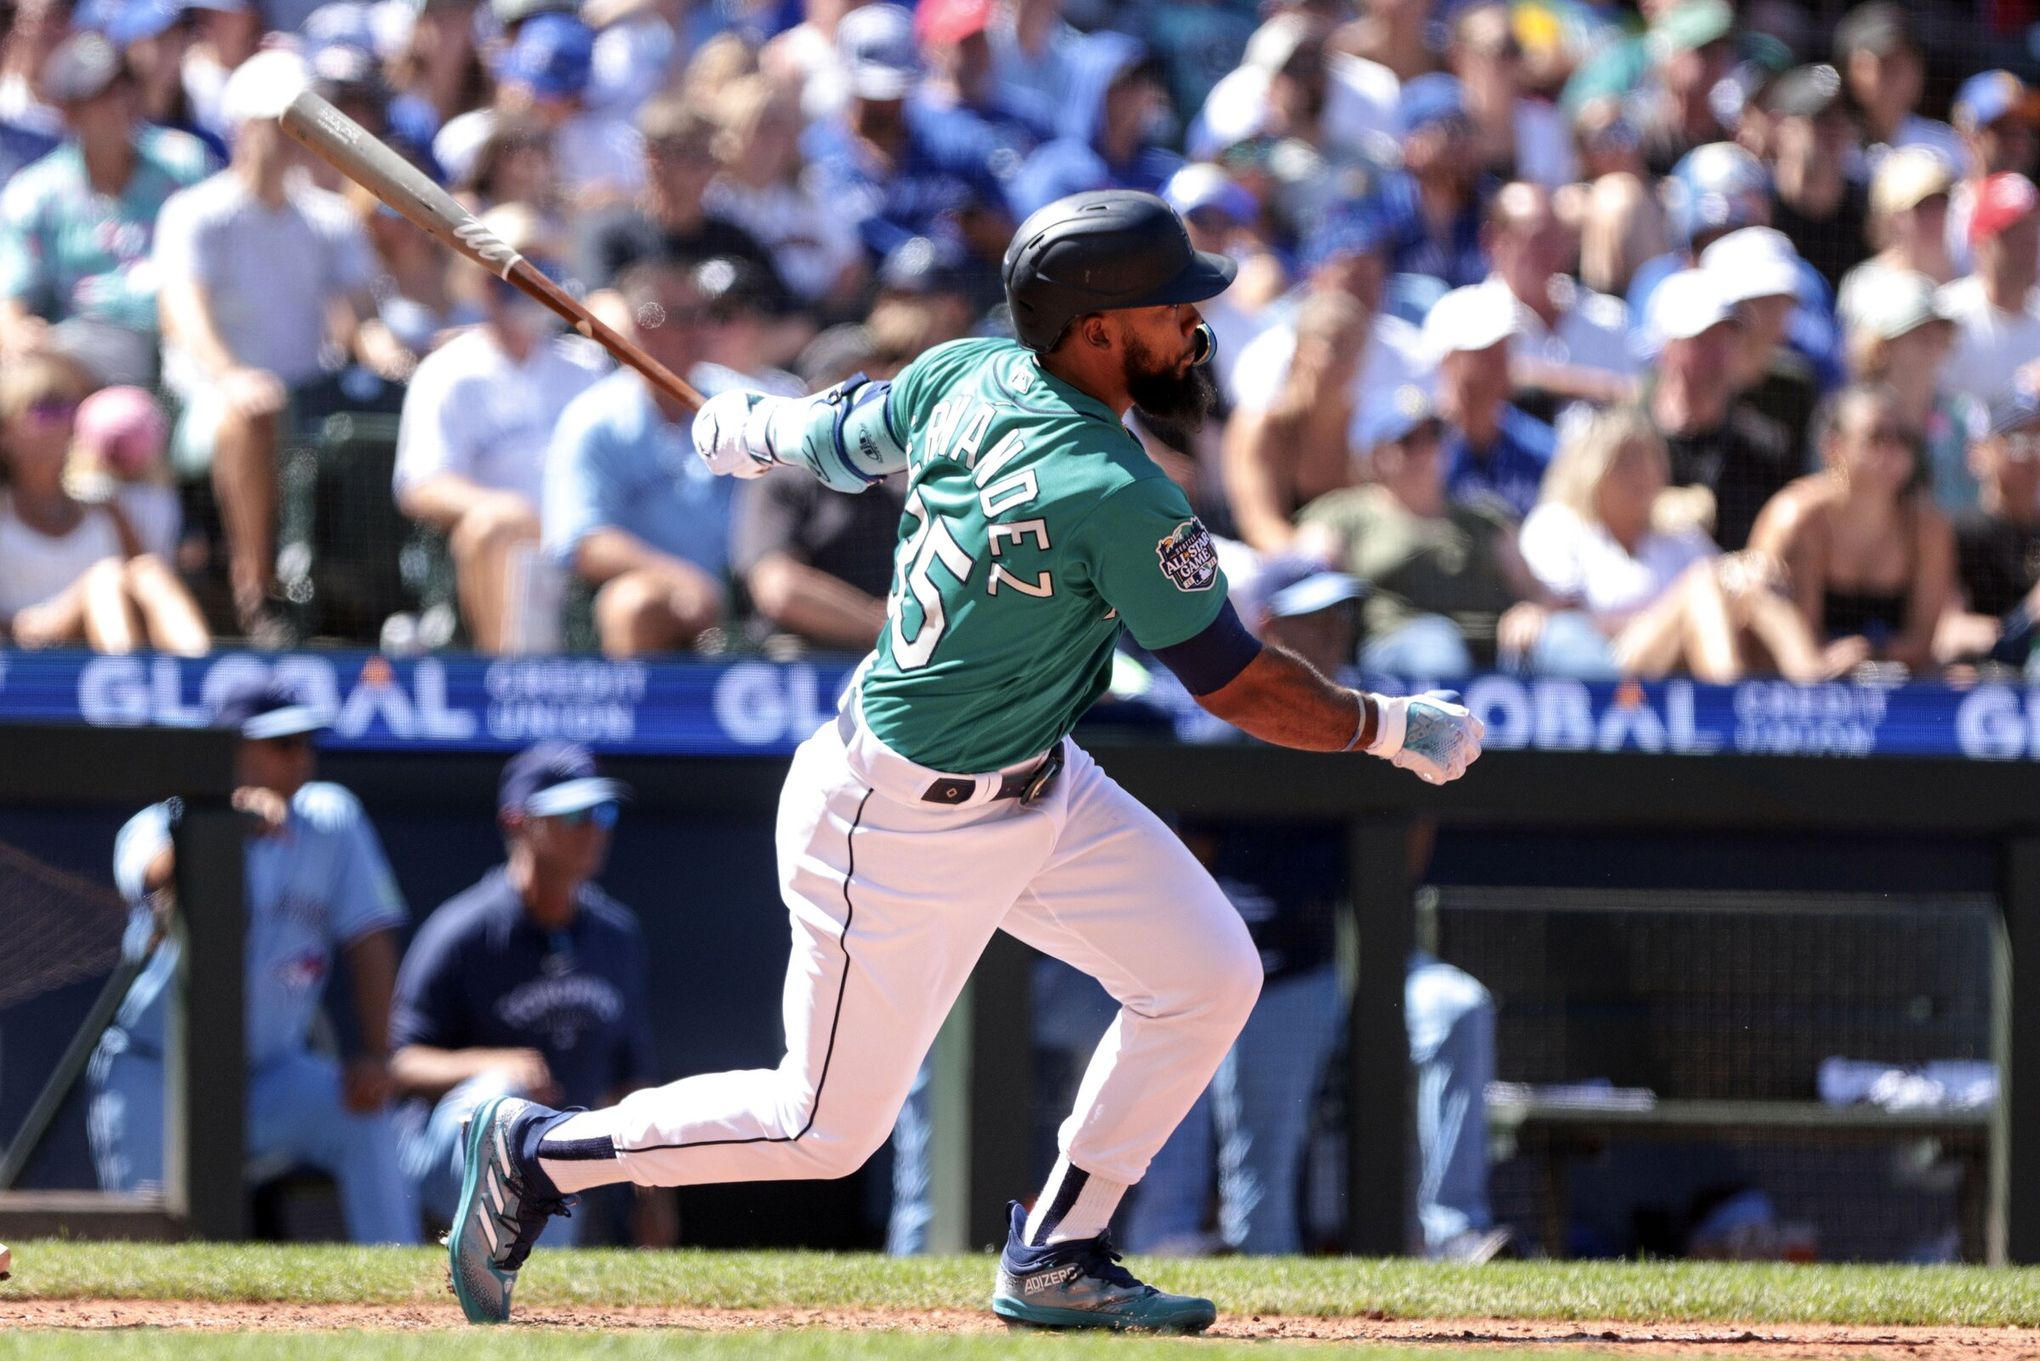 Mariners emerge with walk-off win over Blue Jays